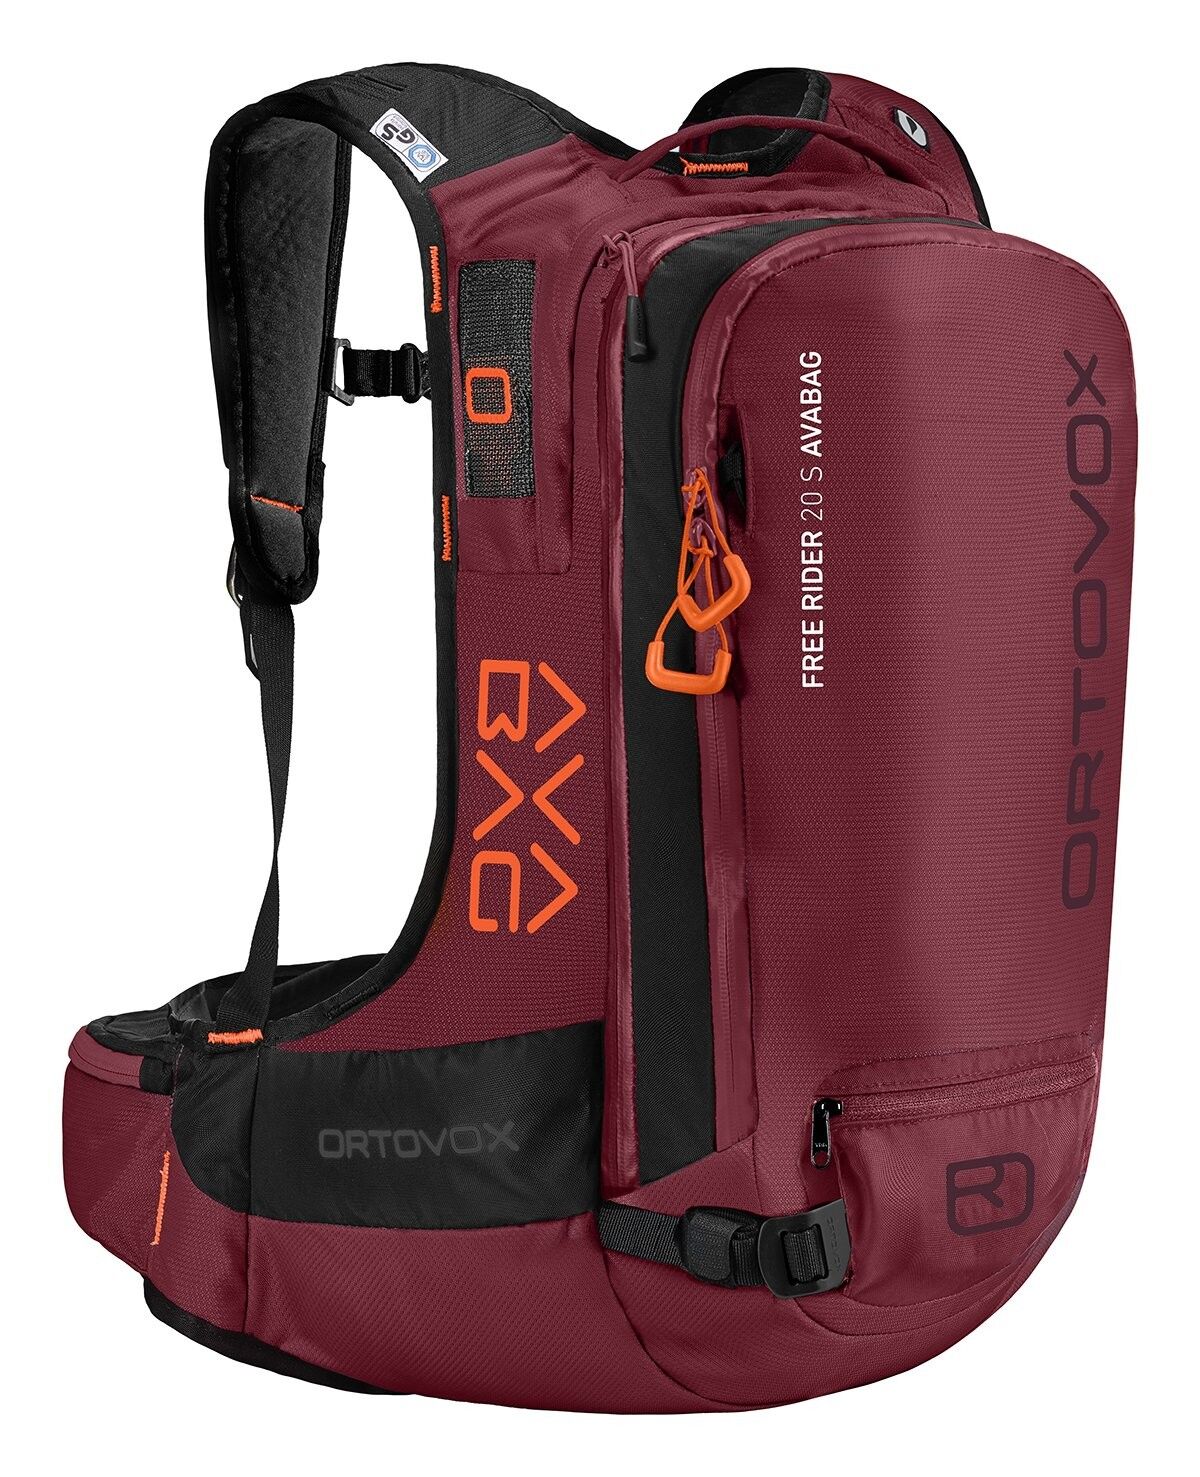 Ortovox - Free Rider 20 S Avabag - Avalanche backpack - Women's